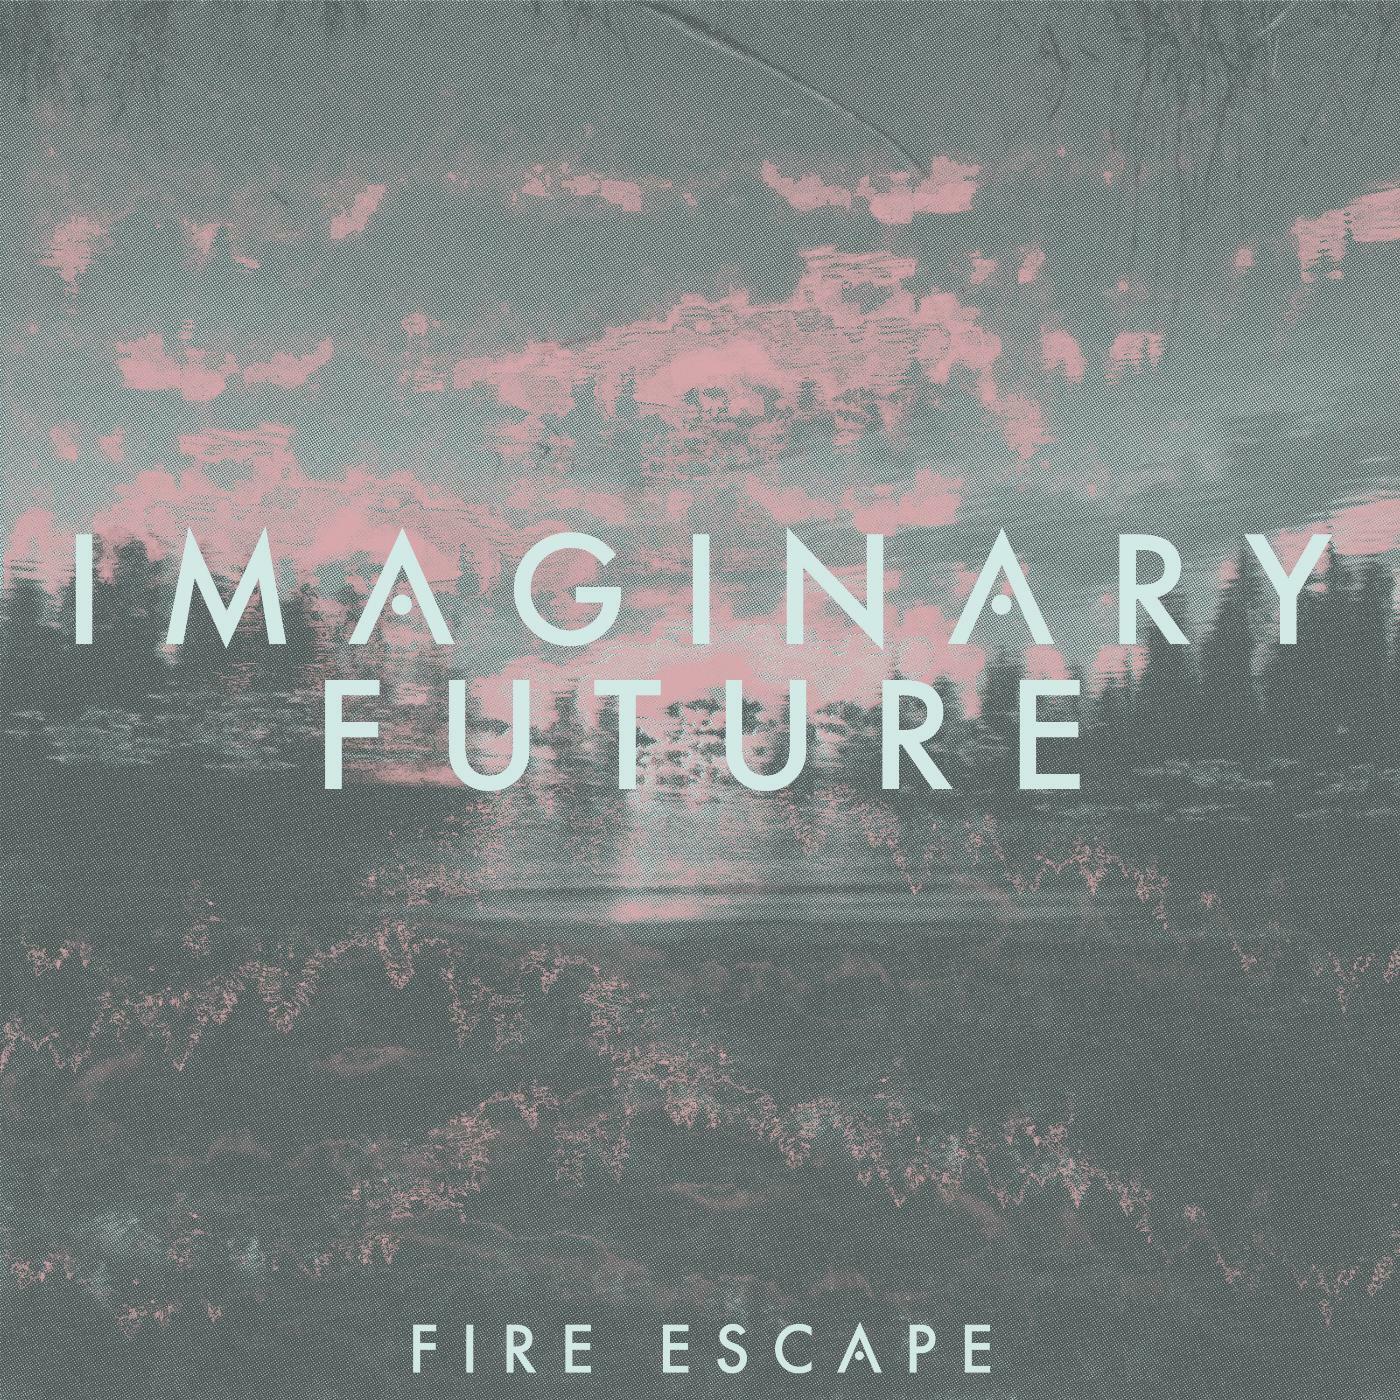 Stream Free Songs By Imaginary Future Similar Artists